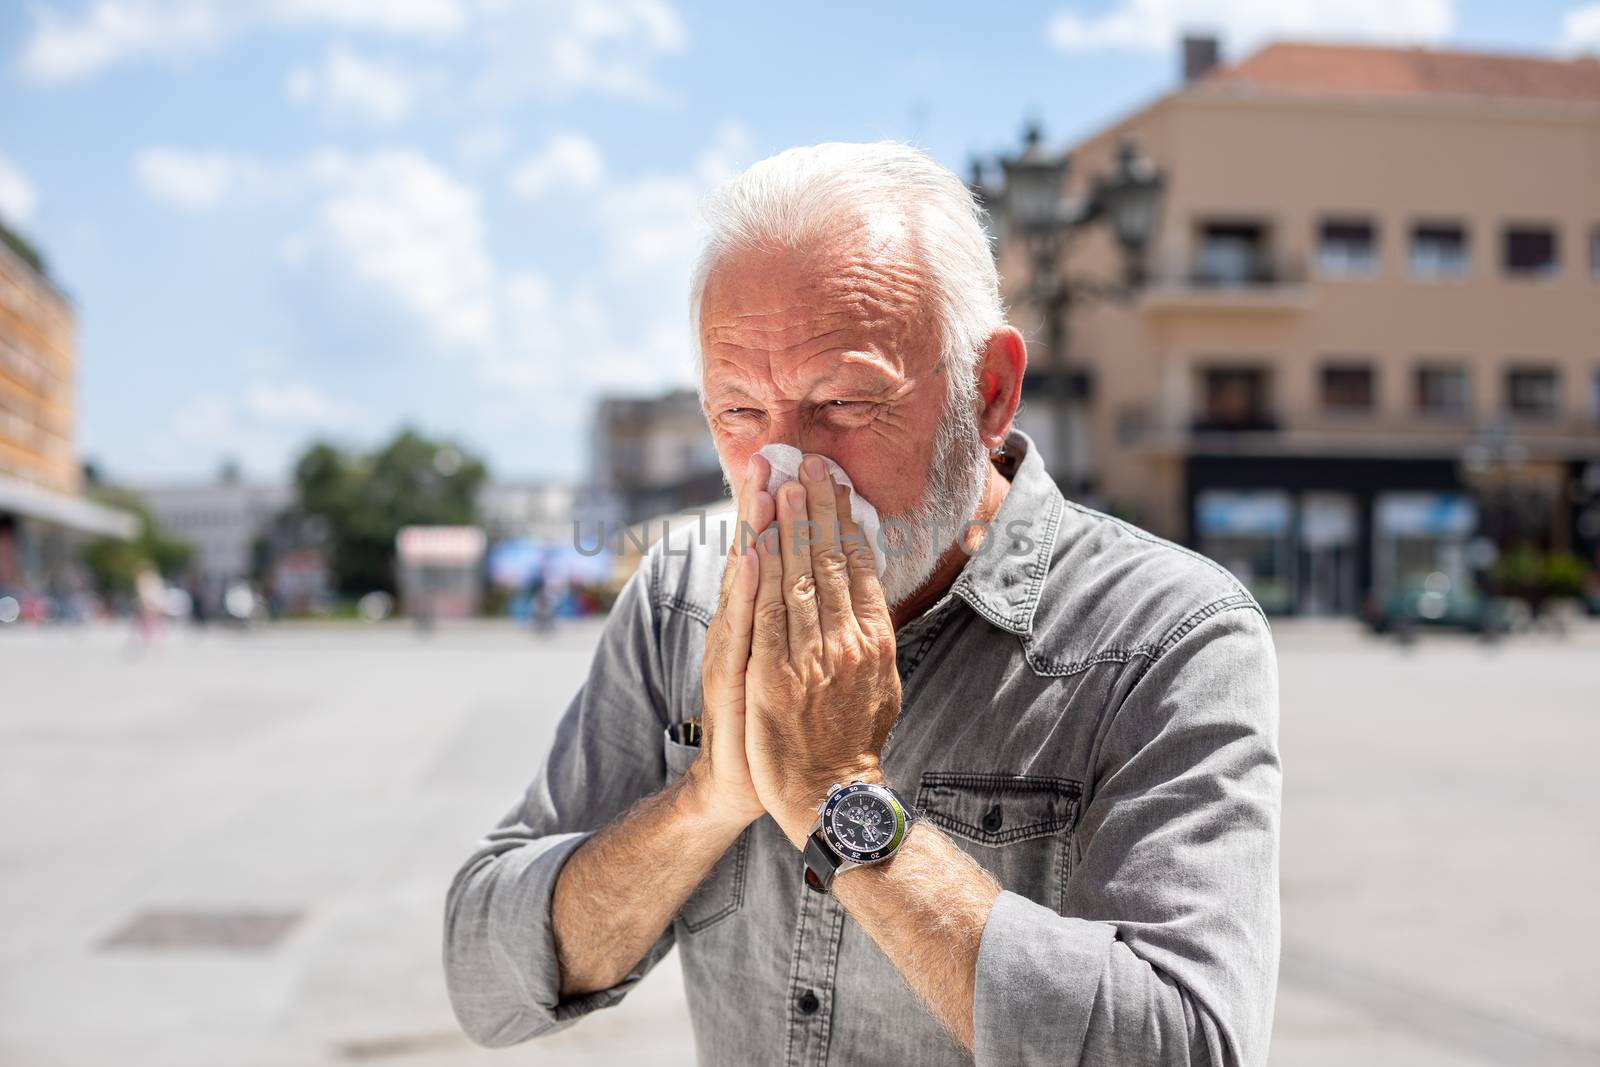 Old man man coughs and sneezes into a handkerchief on street, al by adamr